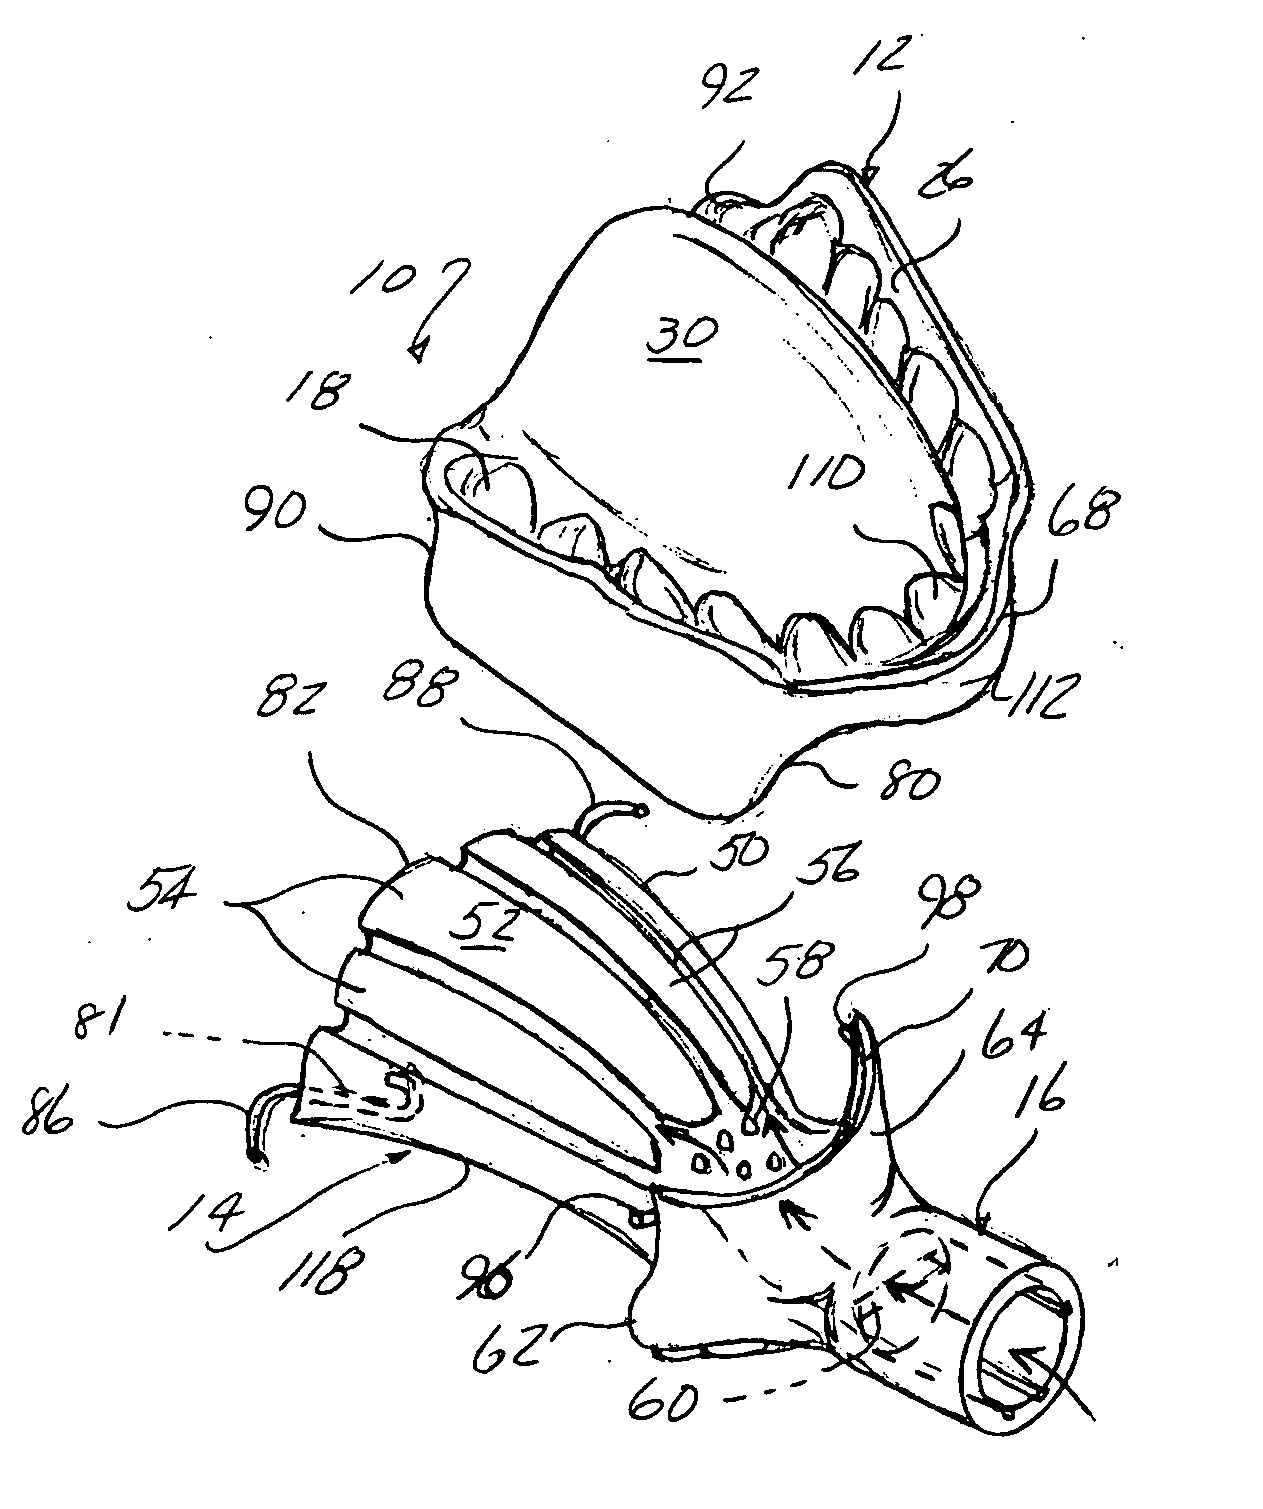 Method and device for addressing sleep apnea and related breathing disorders